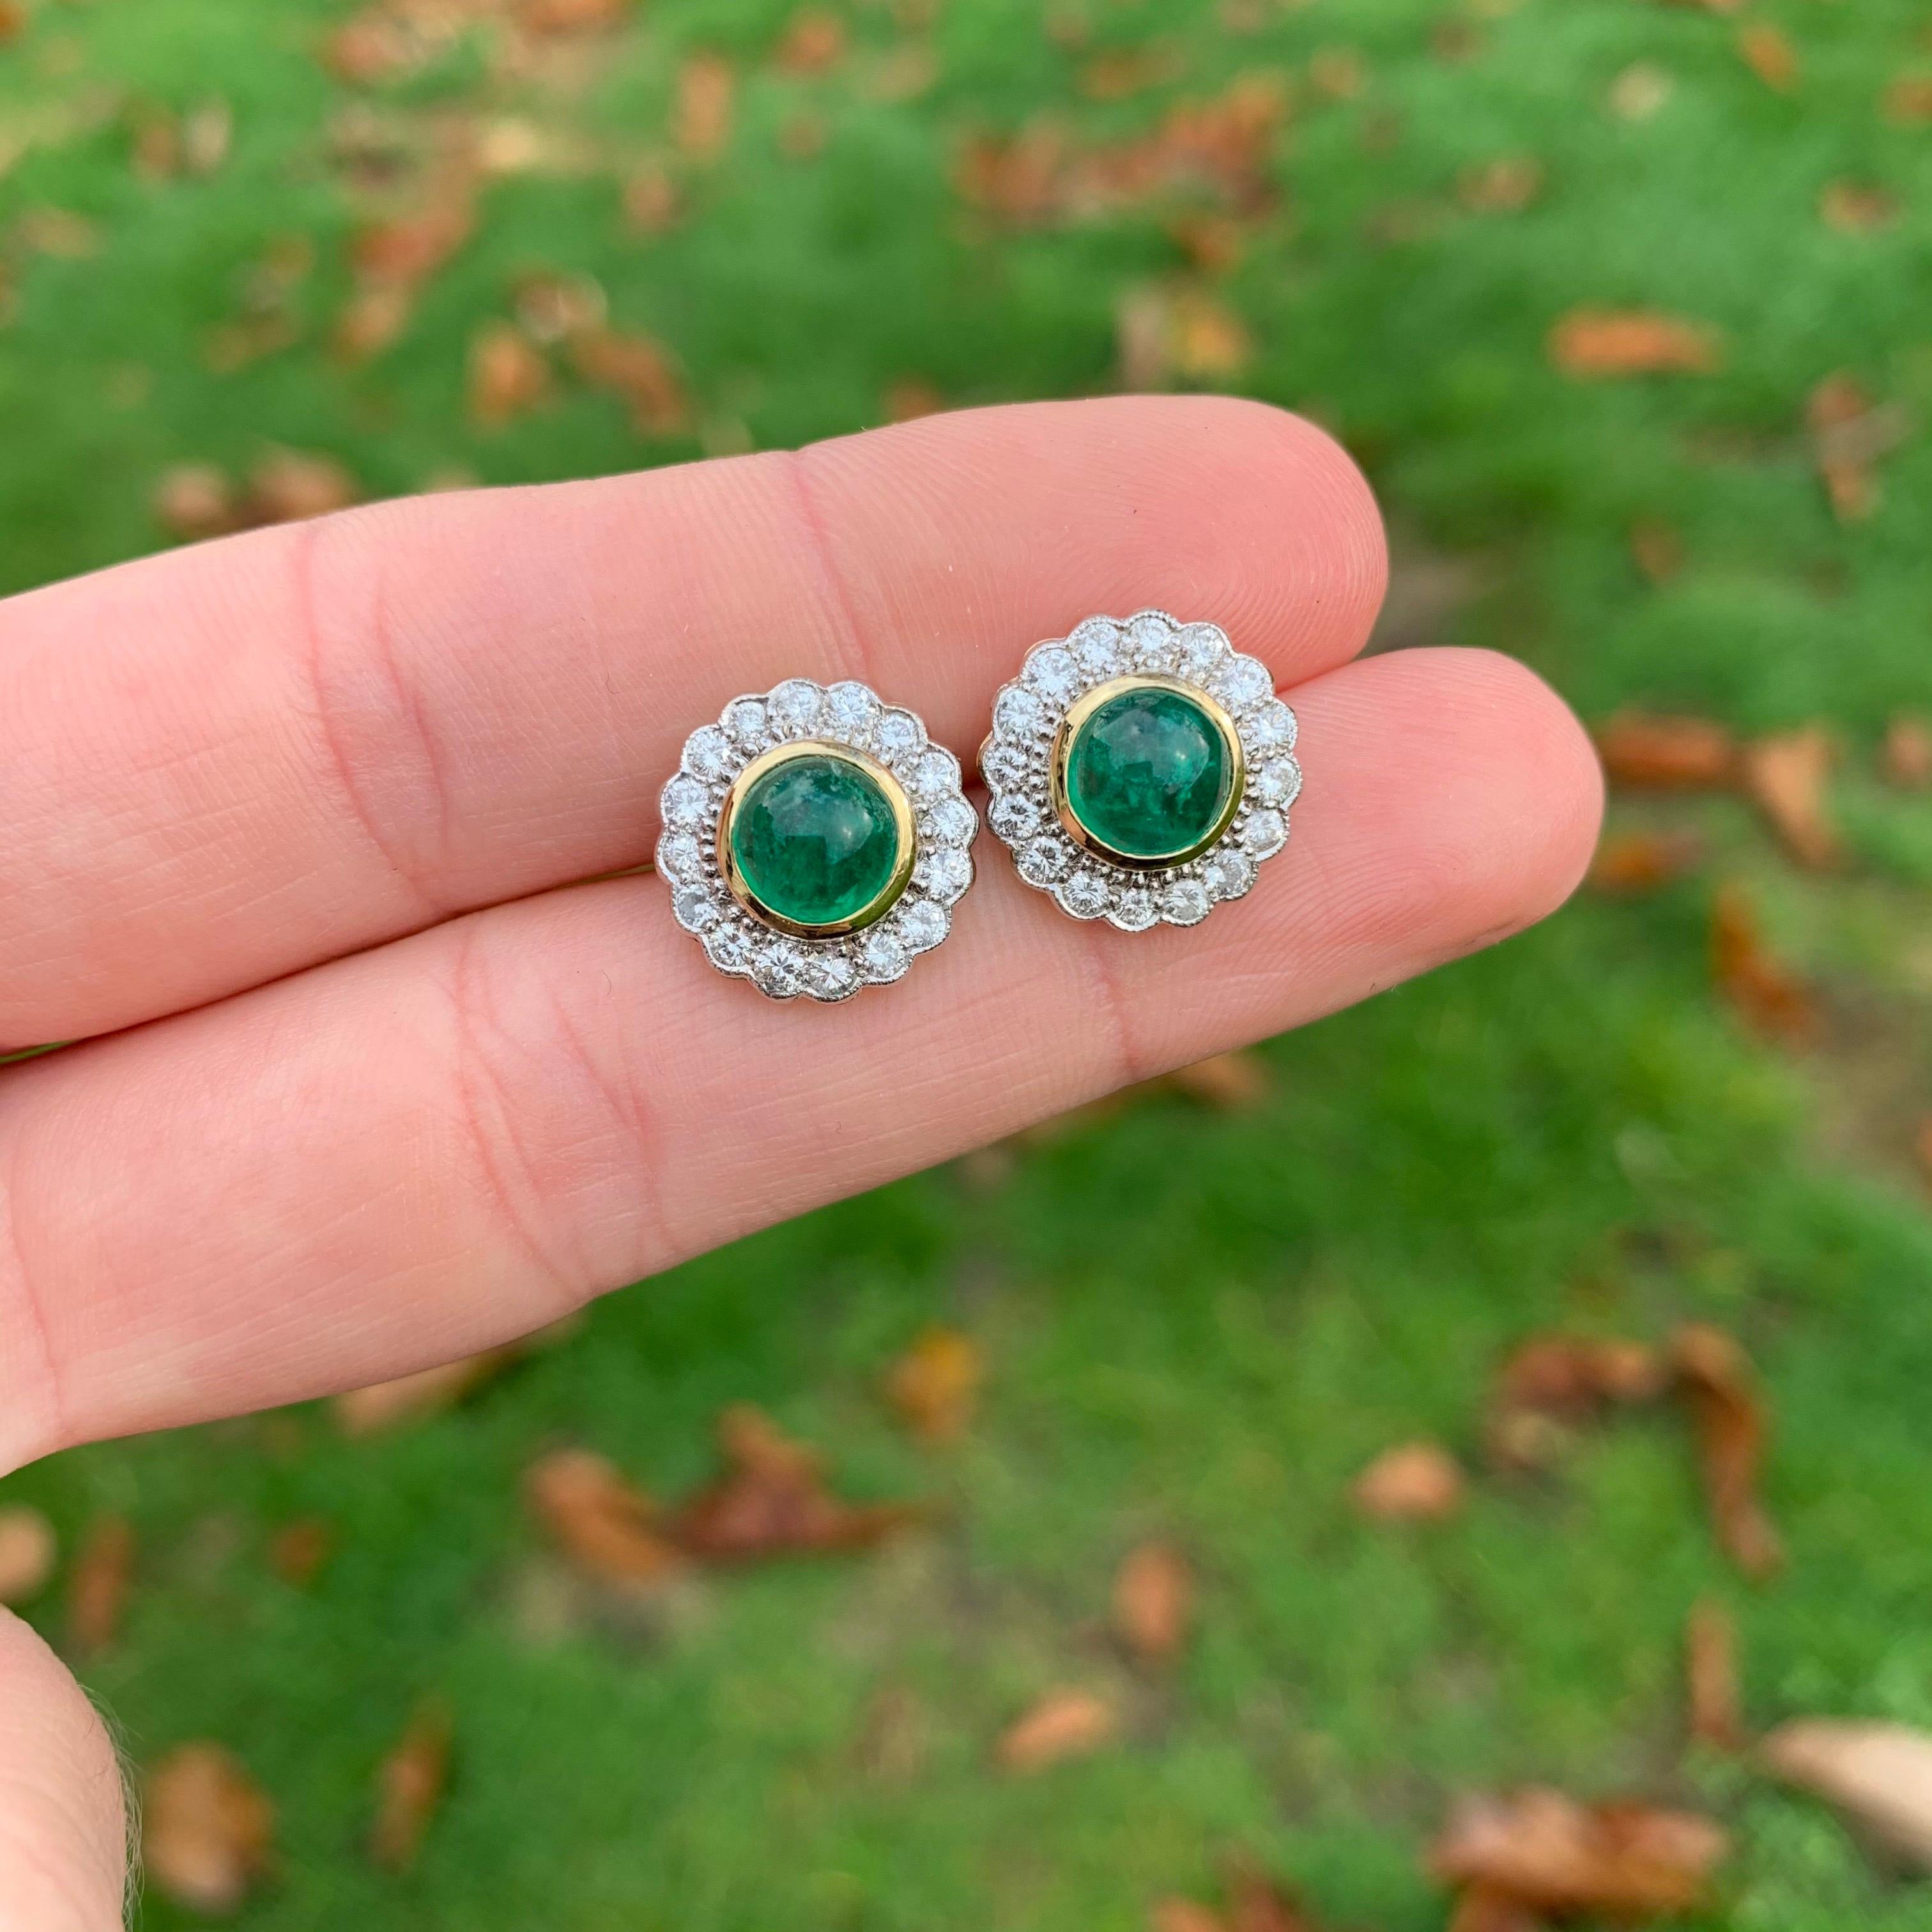 18 Karat Gold Round Cabochon Emerald and Diamond Art Deco Style Earrings For Sale 2